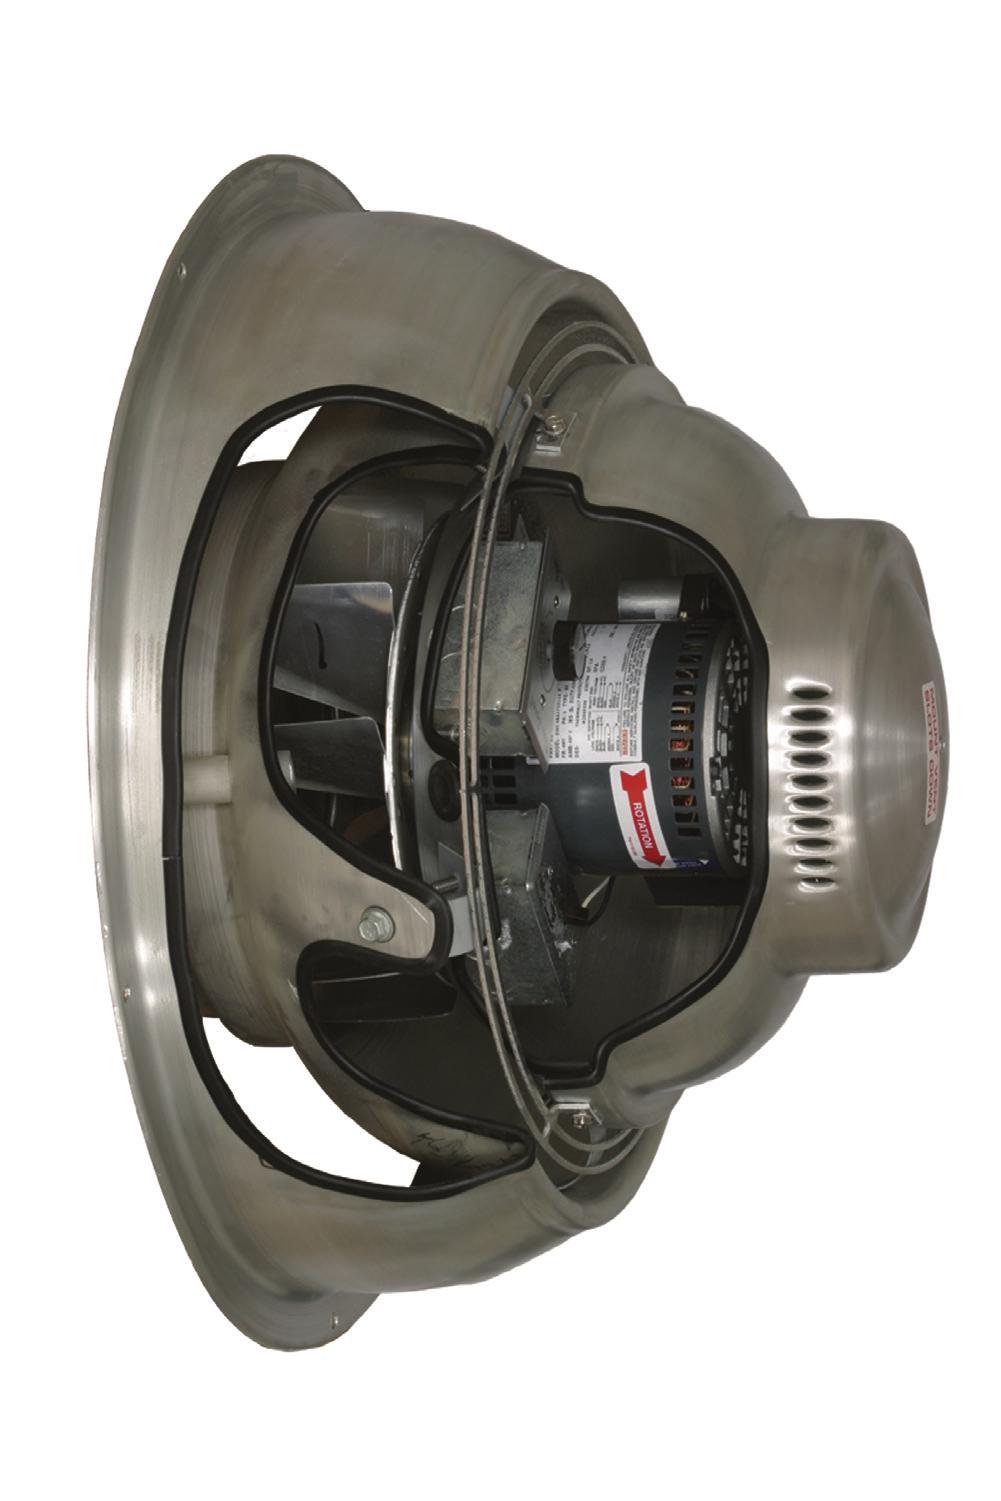 Attractive spun aluminum exterior Direct drive units have low sound levels quiet operation Non-overloading backward inclined wheel for efficiency at higher static pressures AMCA Air Sound Licensed UL